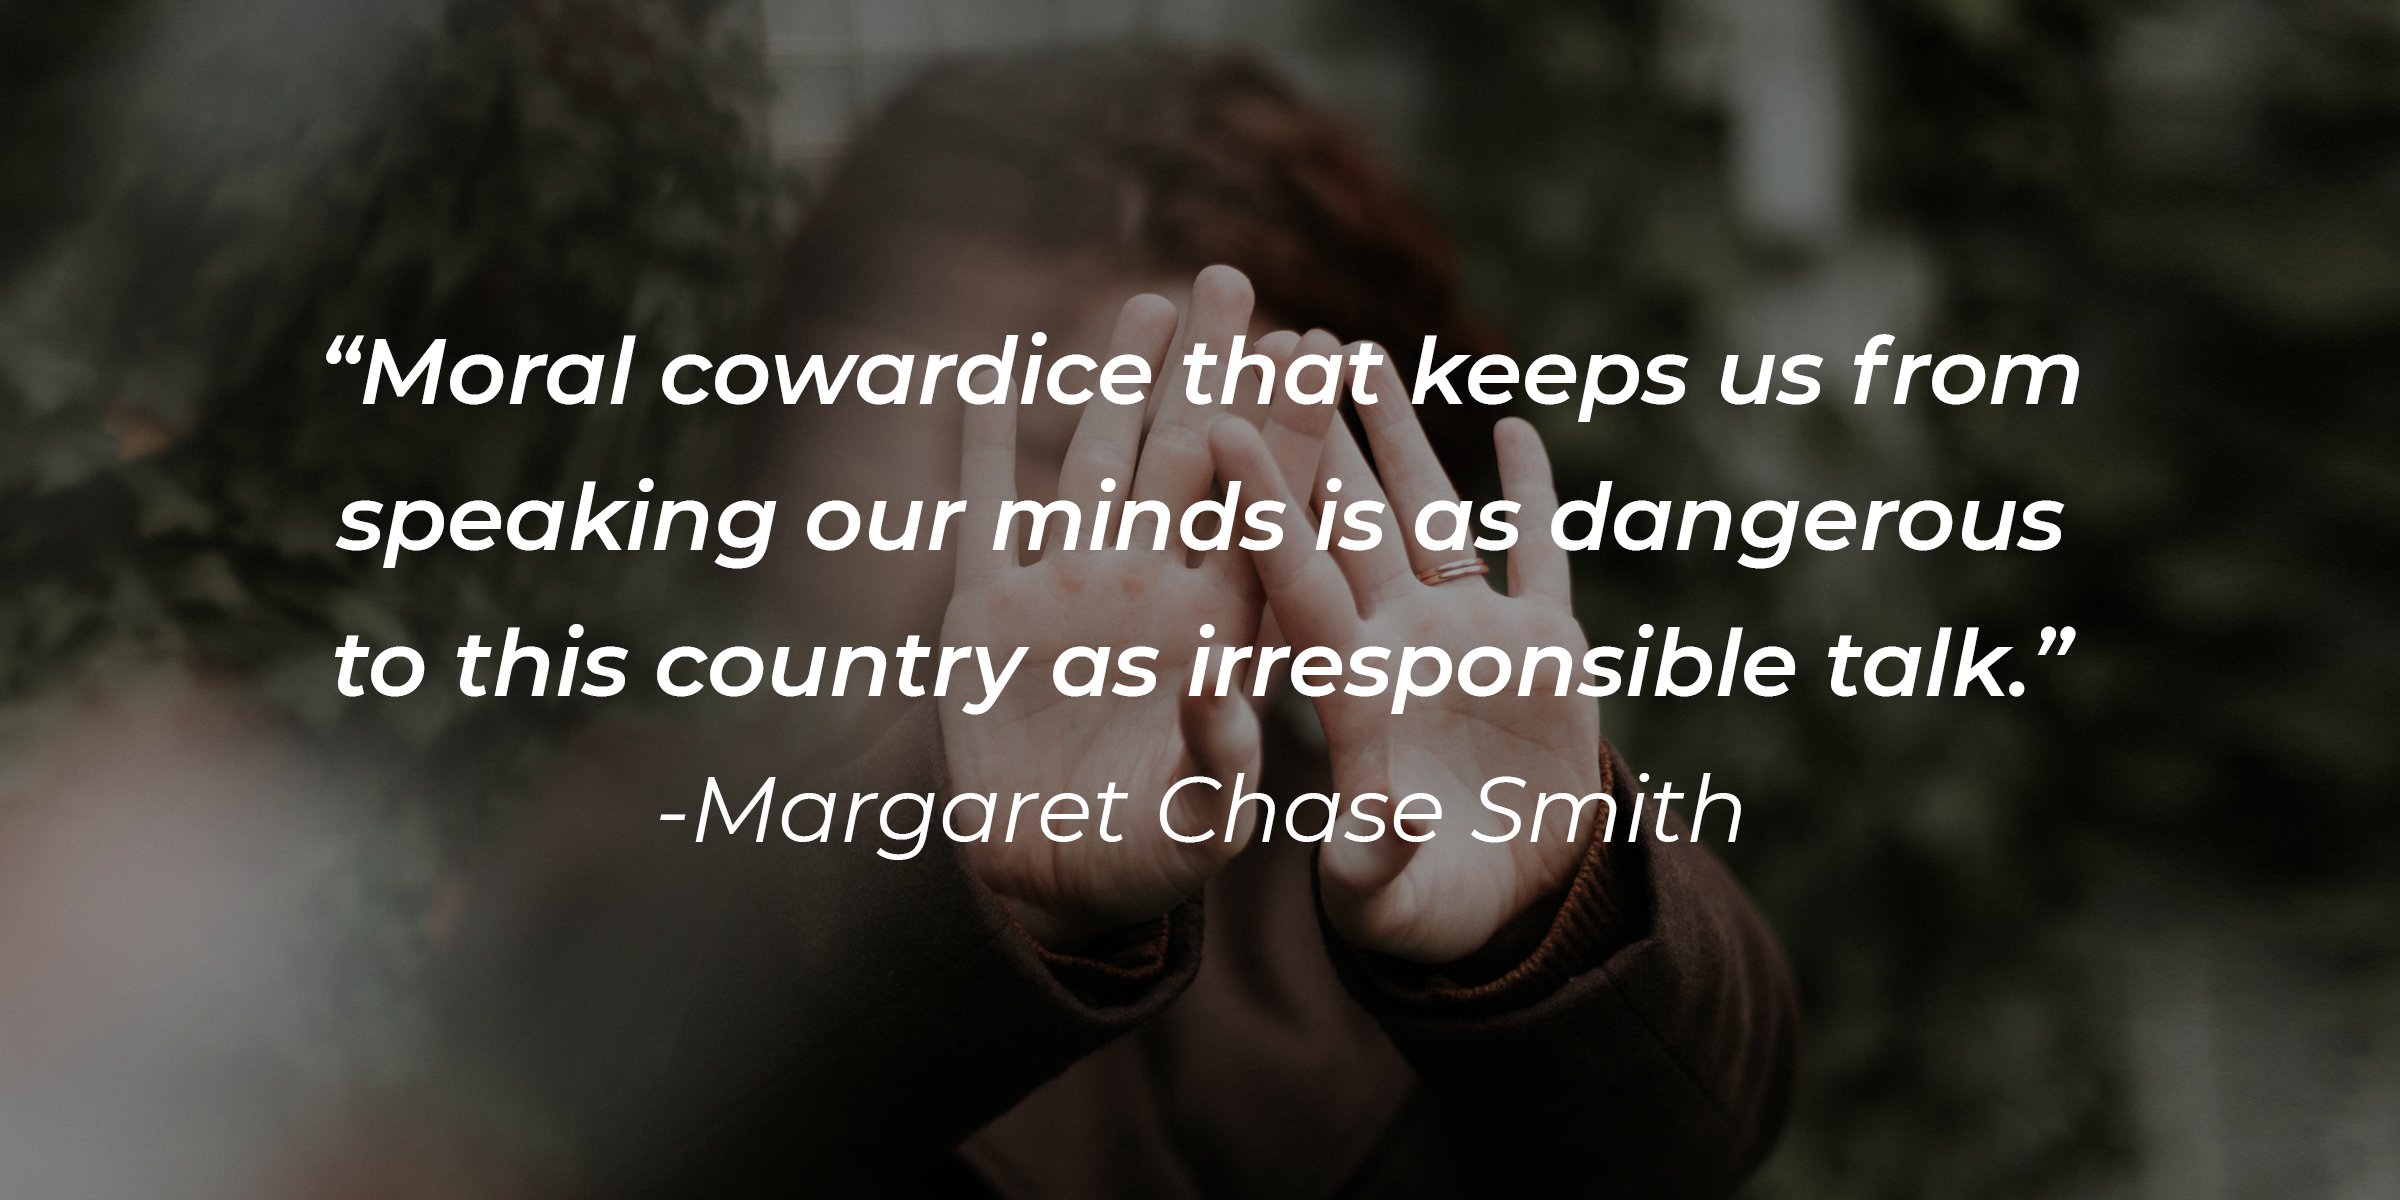 Unsplash | A woman covering her face with a quote, "Moral cowardice that keeps us from speaking our minds is as dangerous to this country as irresponsible talk," by Margaret Chase Smith 